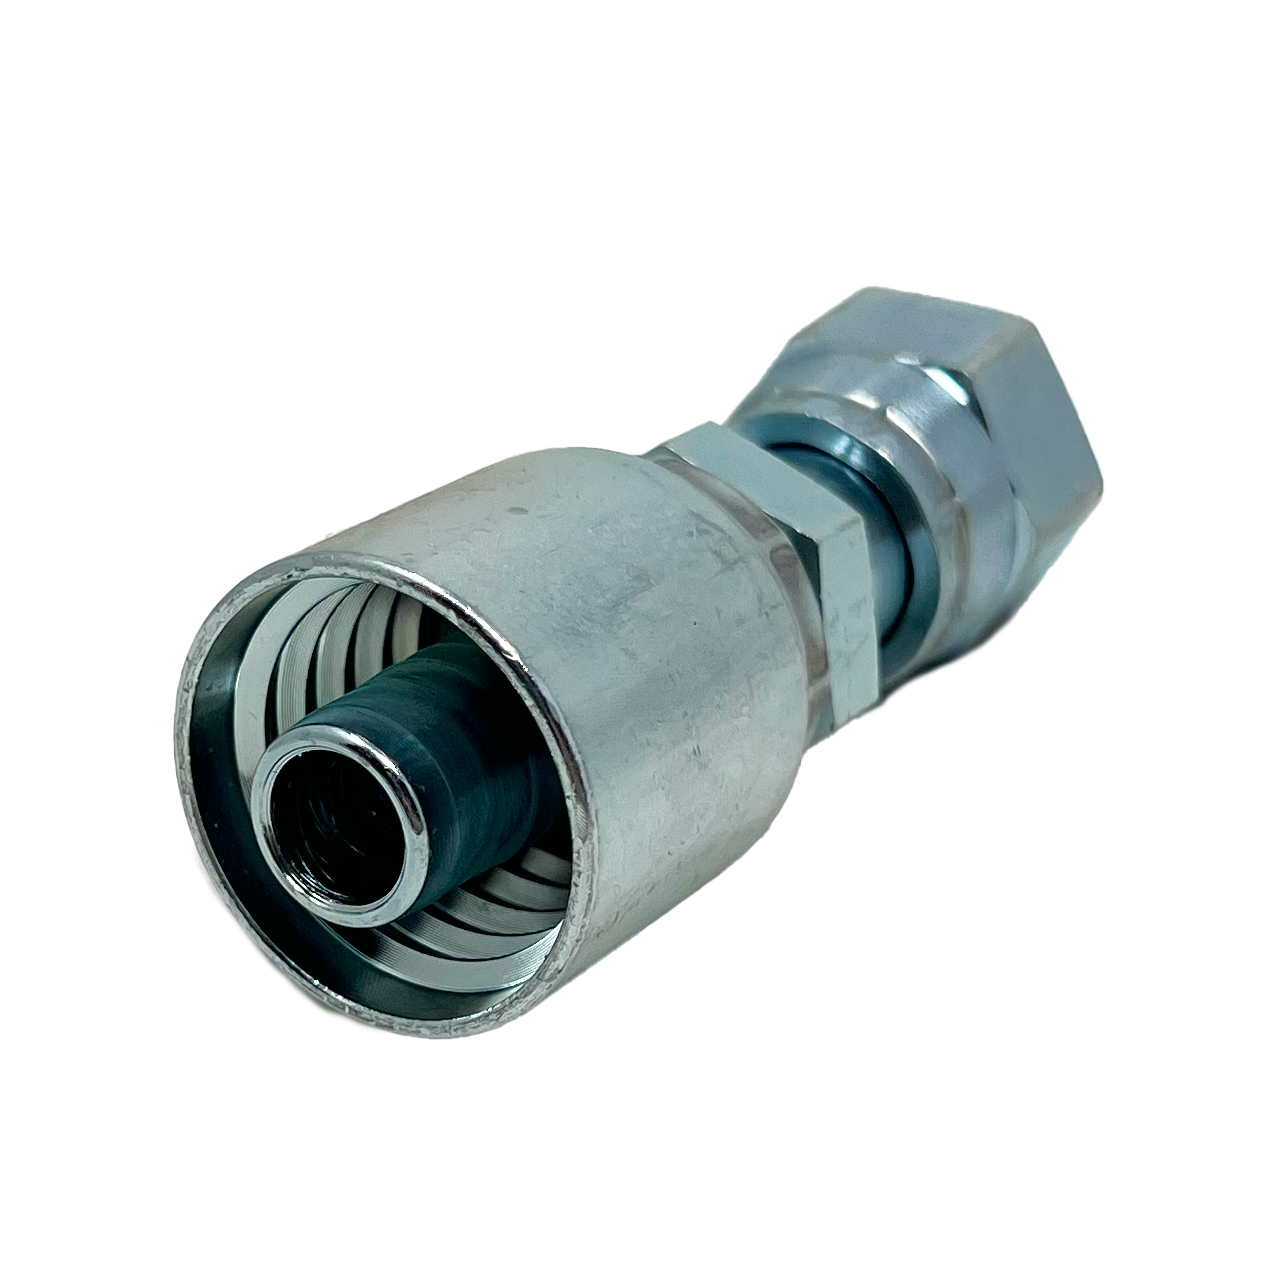 B2-OFFX-0808: Continental Hose Fitting, 0.5 (1/2") Hose ID x 13/16-16 Female ORFS, Straight Swivel Connection